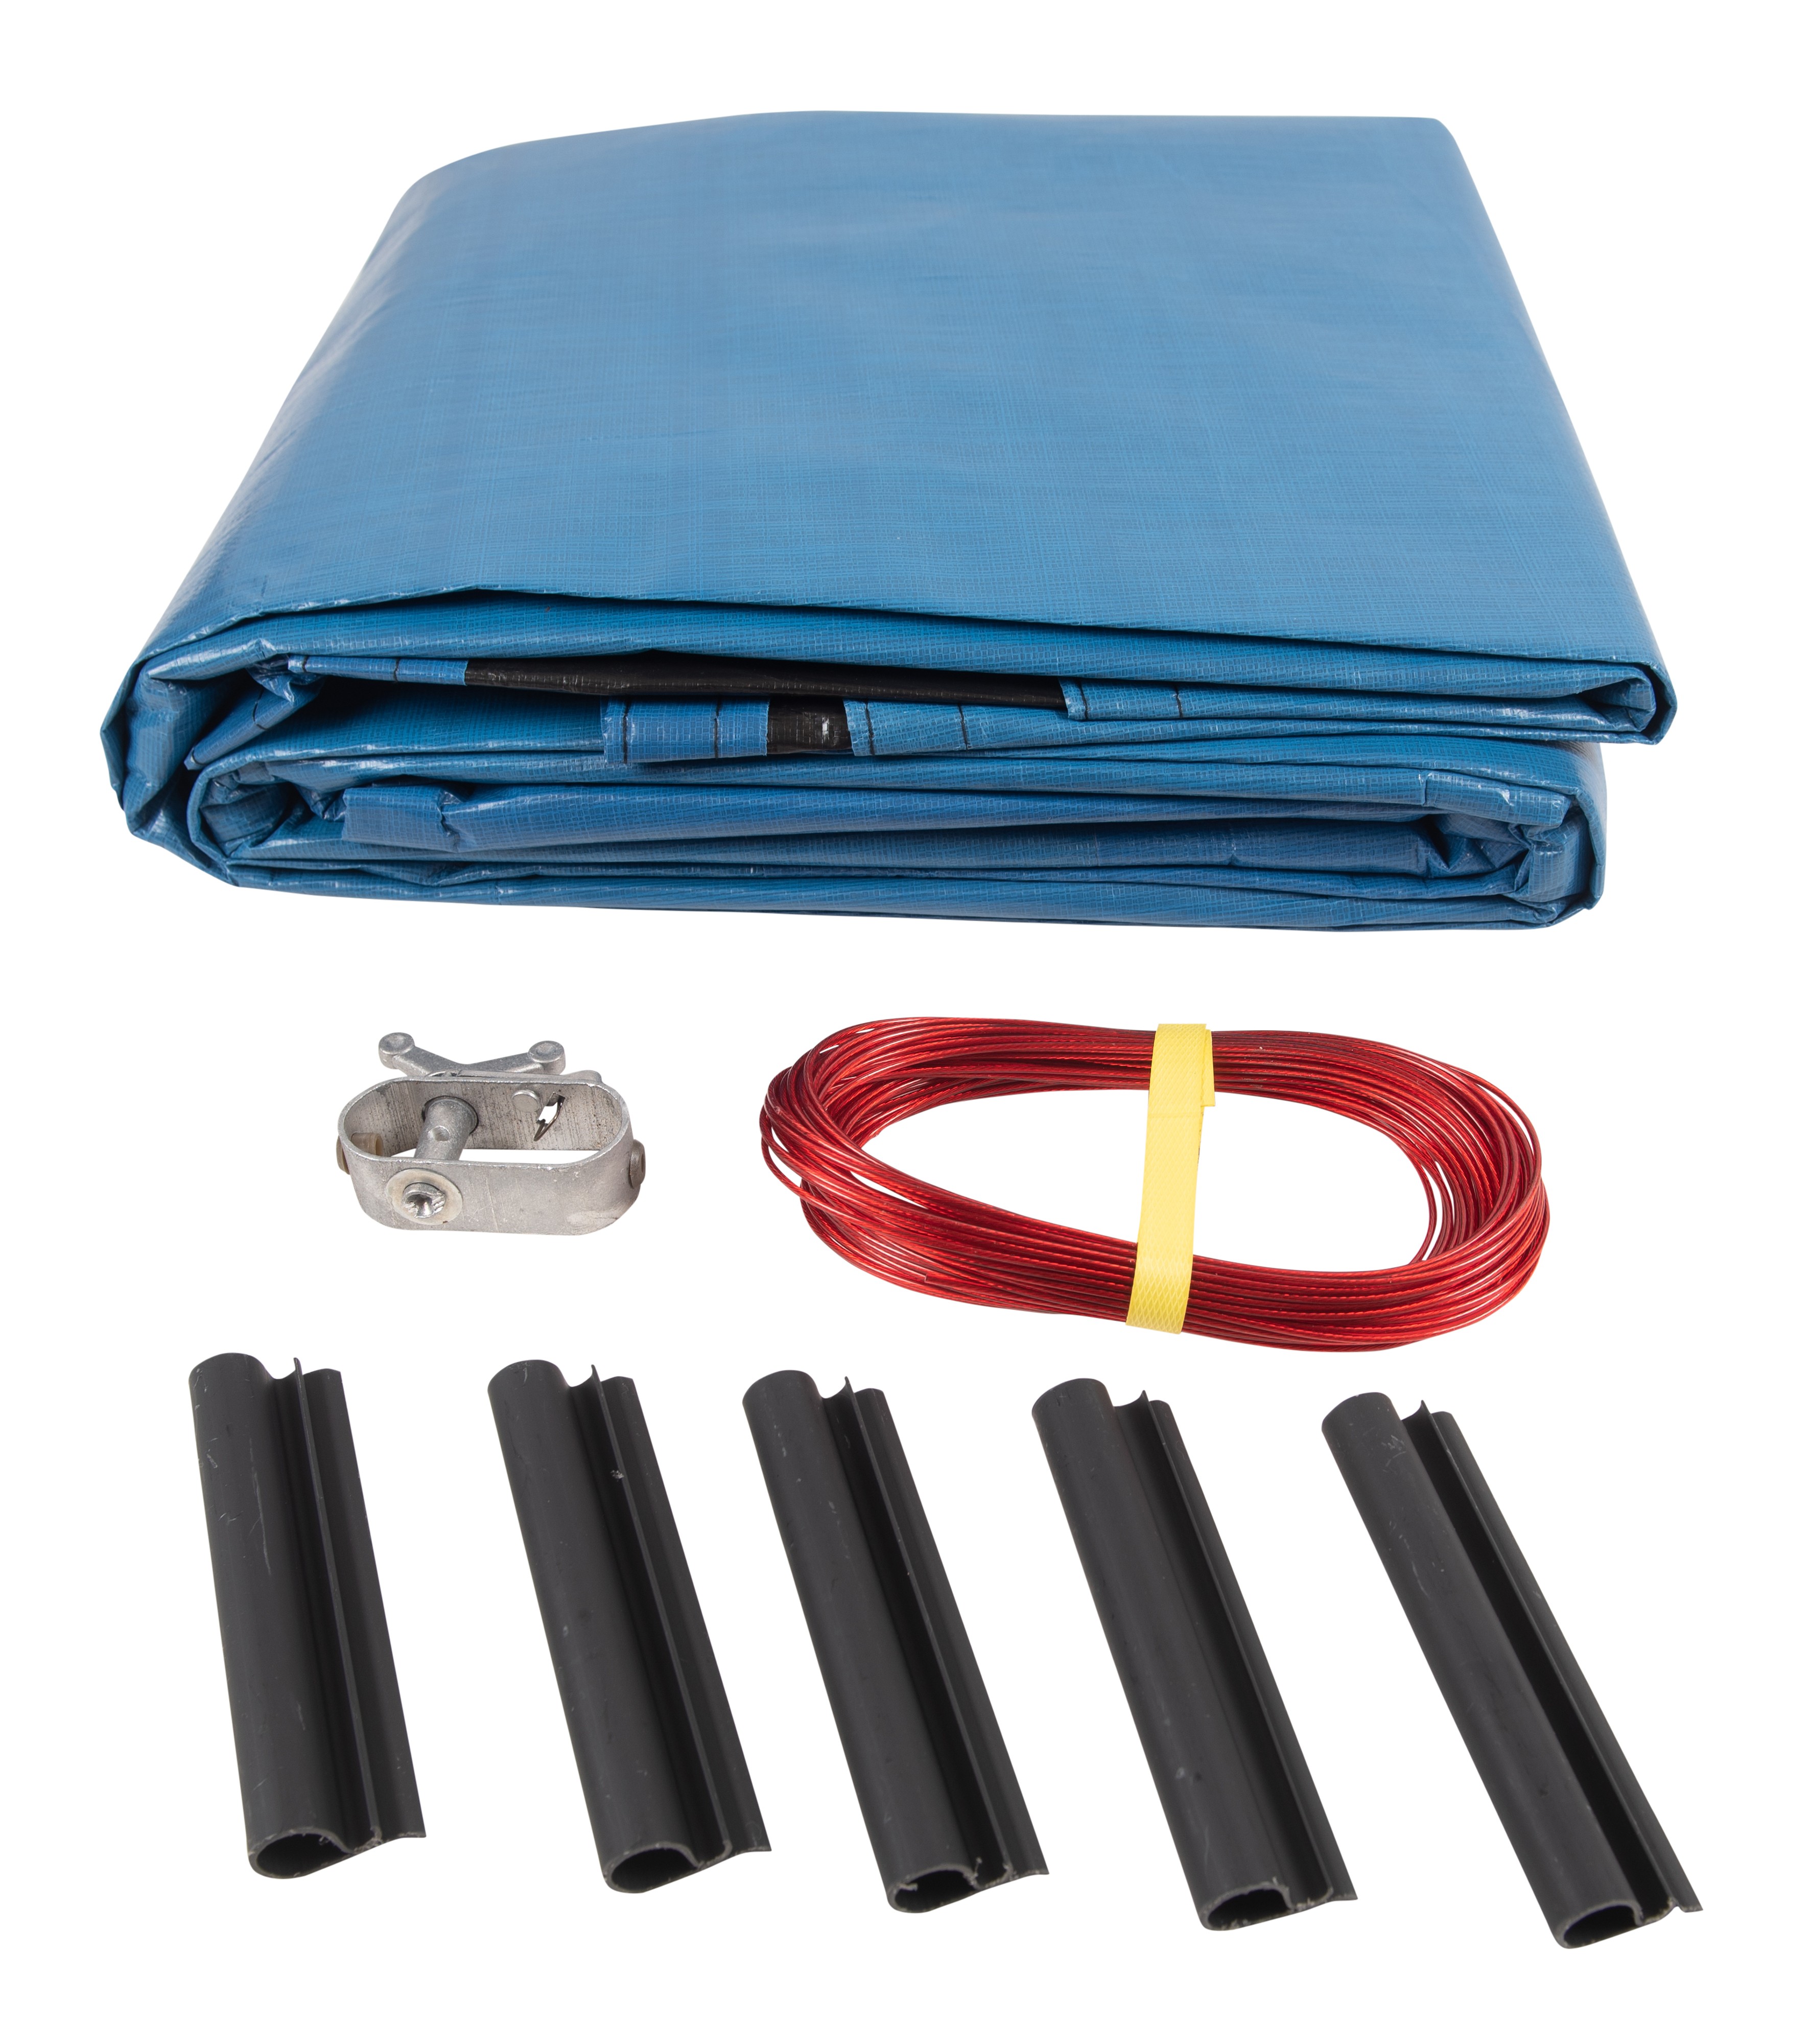 SET SunSolar Energy Technologies-  Super Duty series Above Ground Solid Pool Cover for 18x34 Foot Oval Swimming Pool - Winter Pool Cover with Sturdy Cable and Winch 15-Yr warranty. Cover Clips Included.